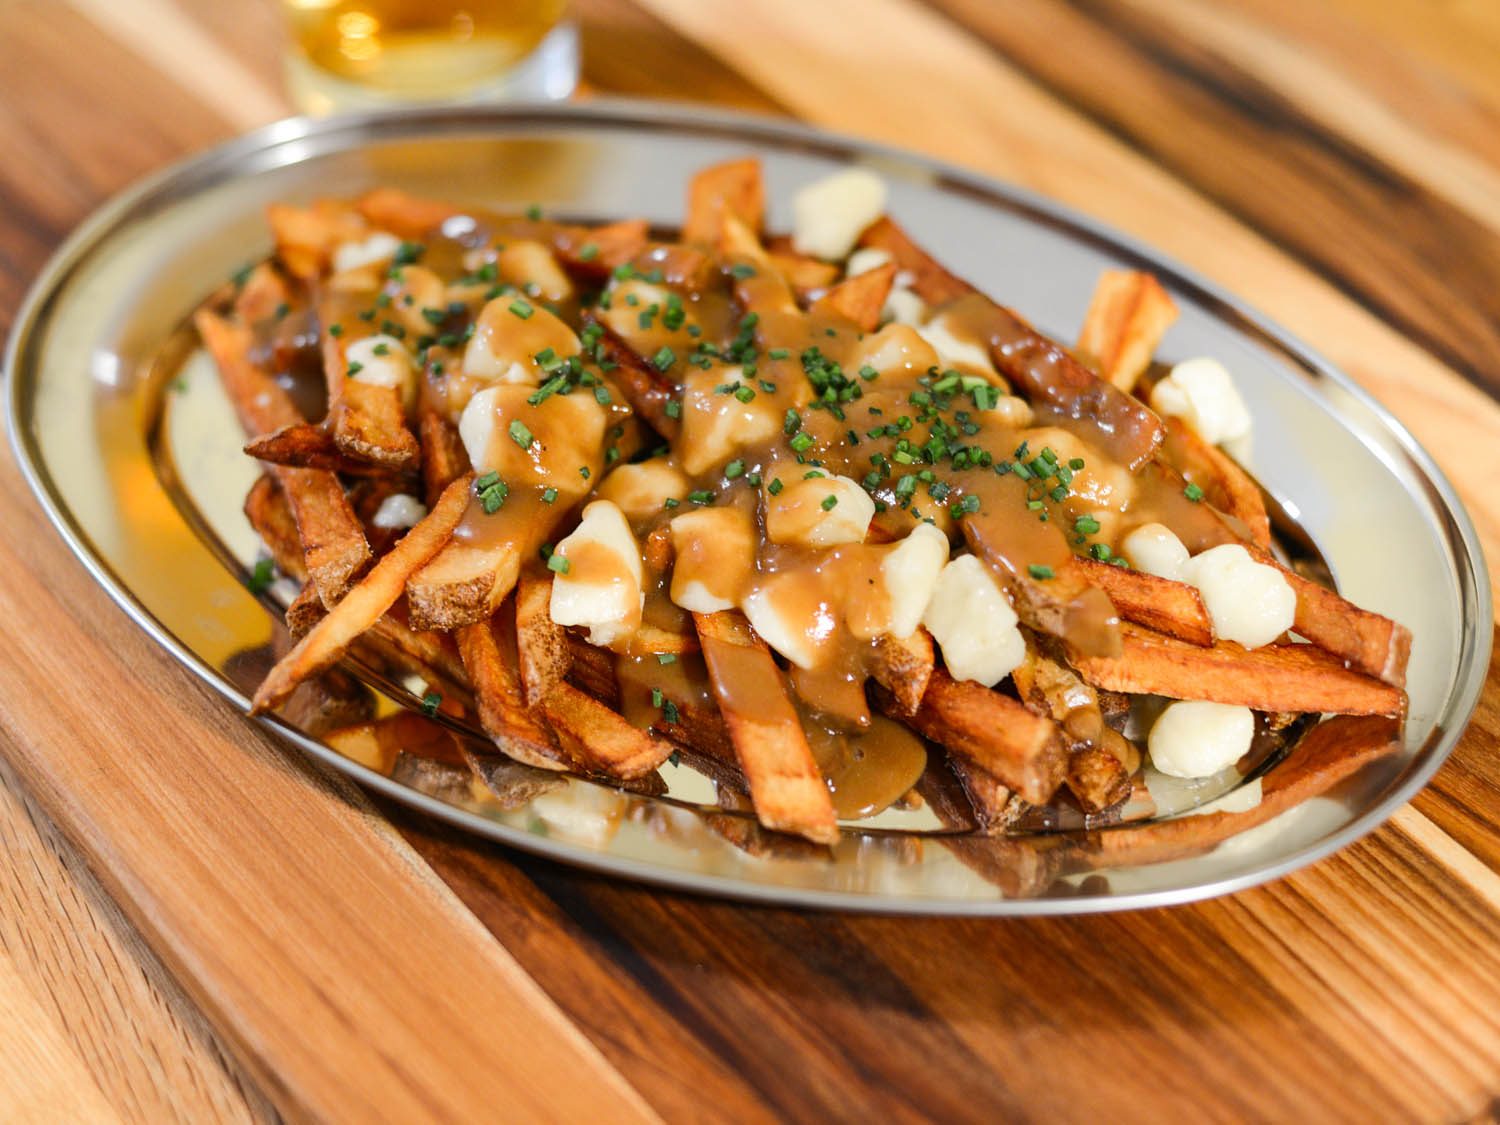 🌮 Most People Can’t Match 16/24 of These Foods to Their Country on a Map – Can You? Poutine